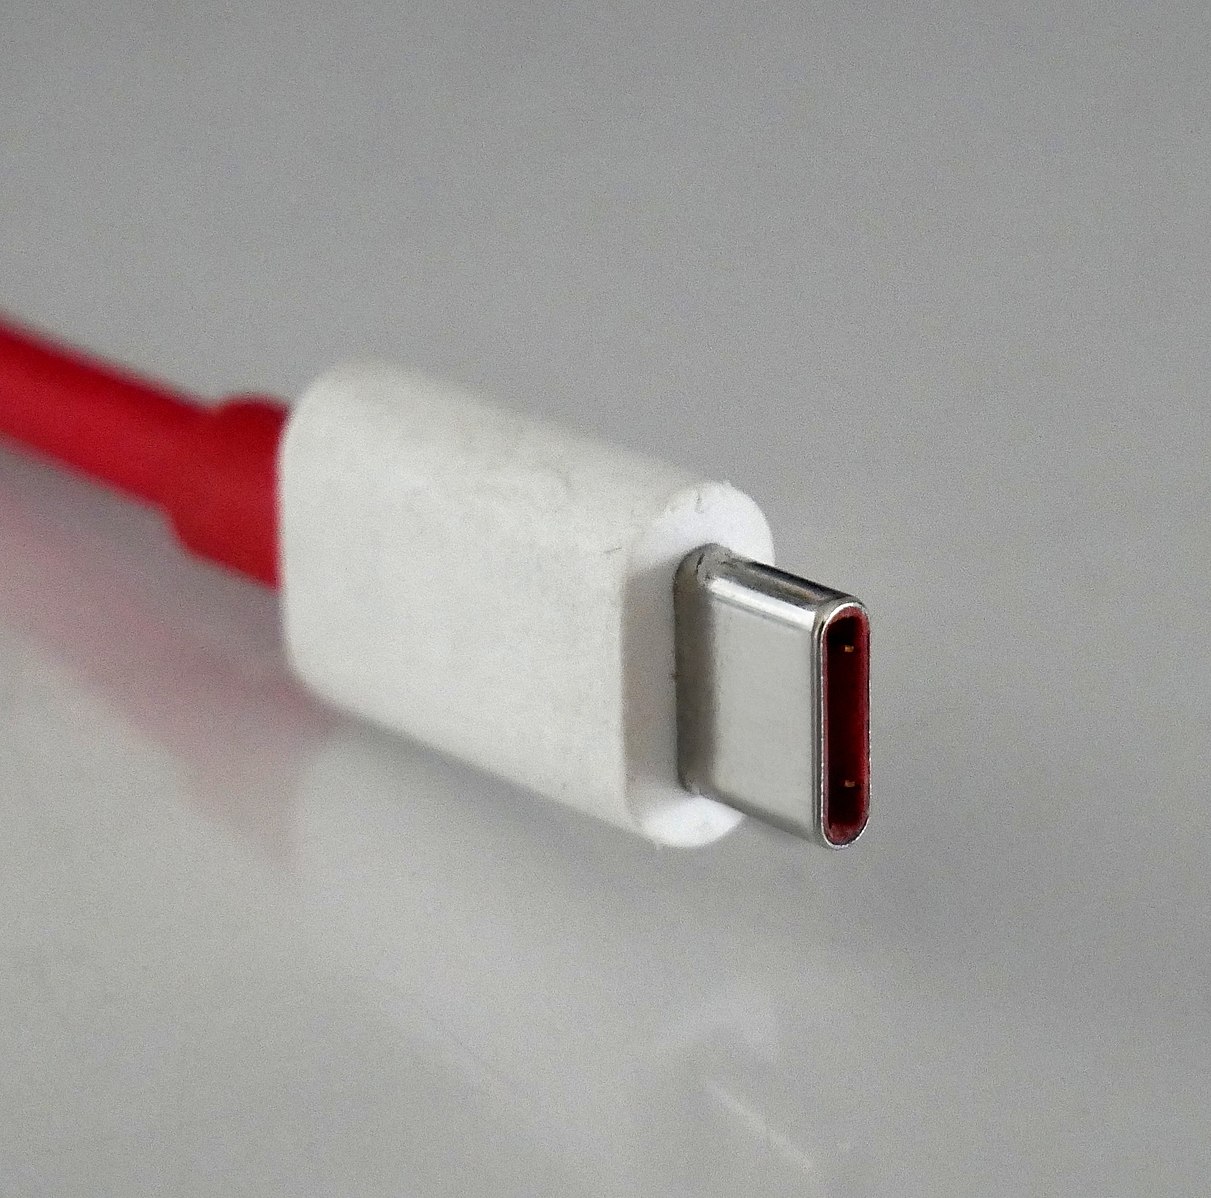 Is USB A the same as a standard USB (which fits into the USB port of a  laptop)? - Quora